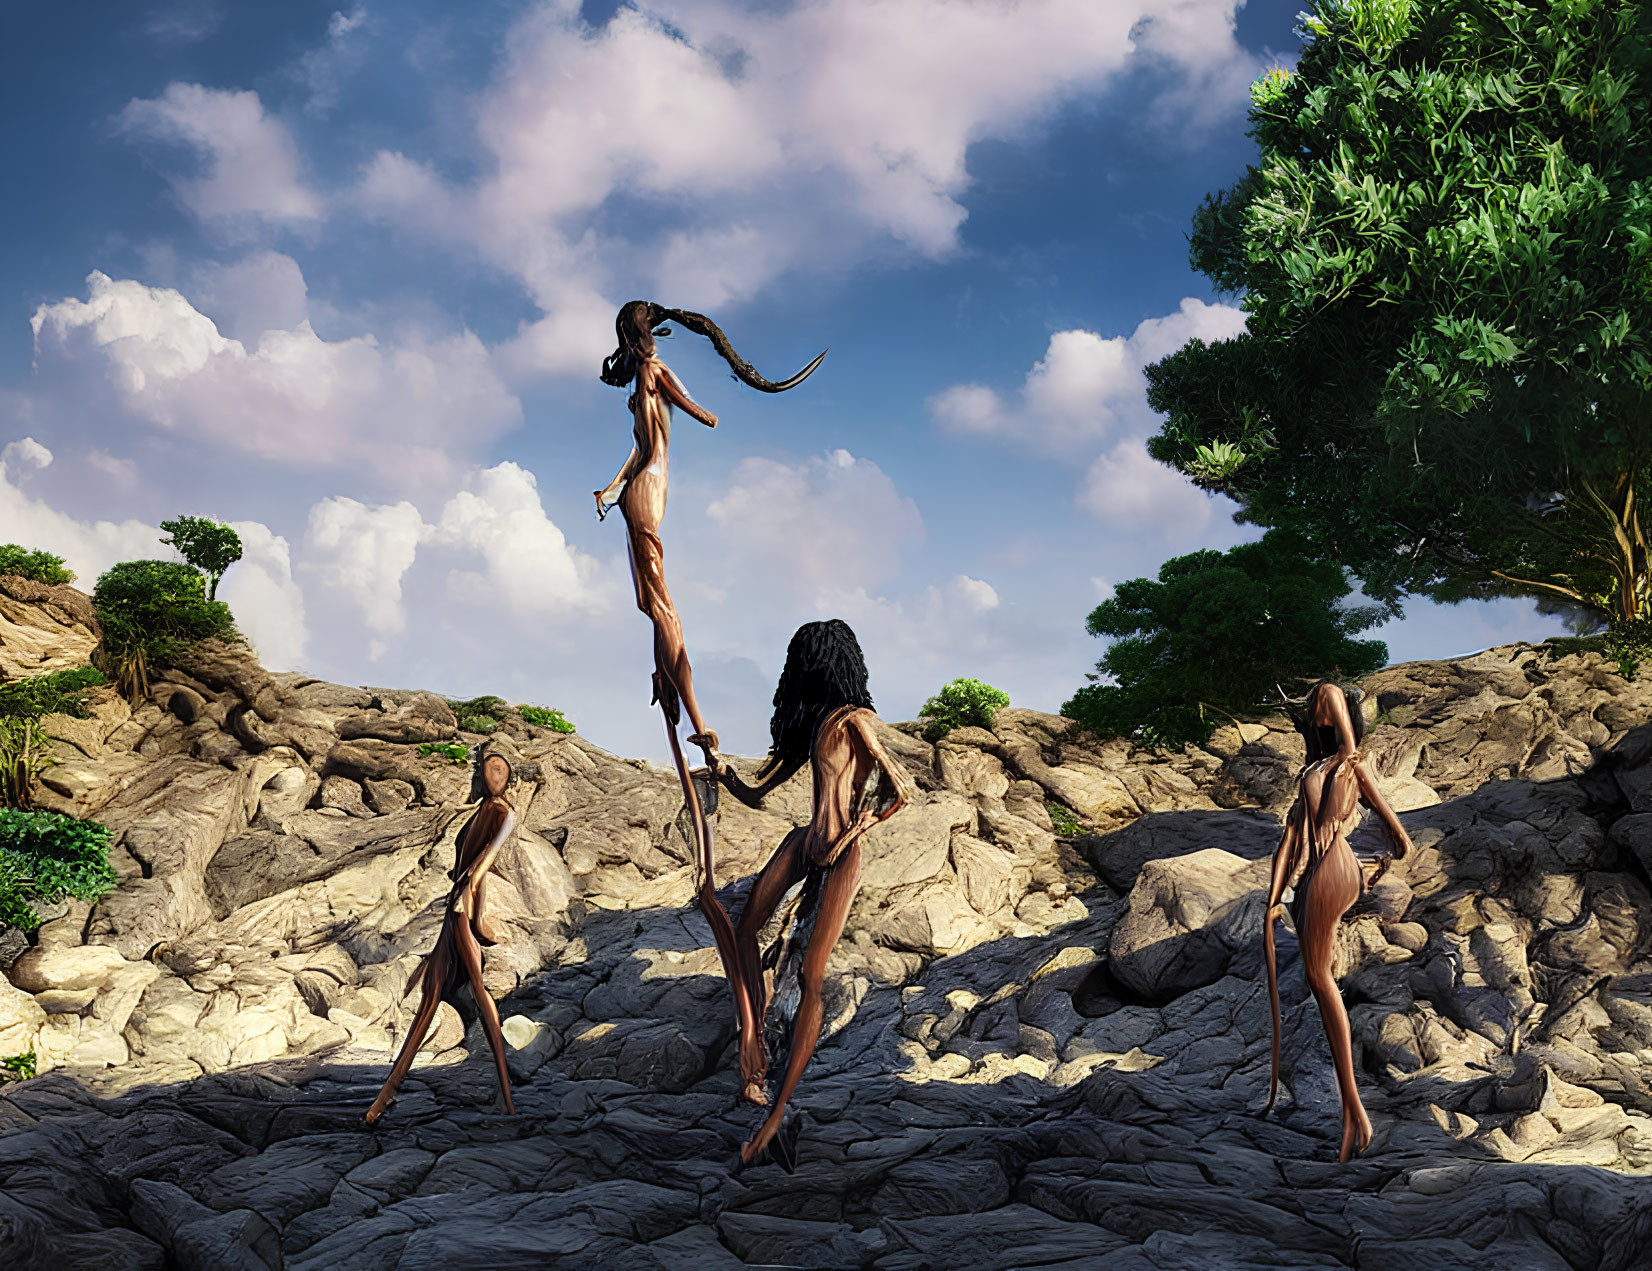 Three humanoid figures with staff on rocky terrain under clear sky